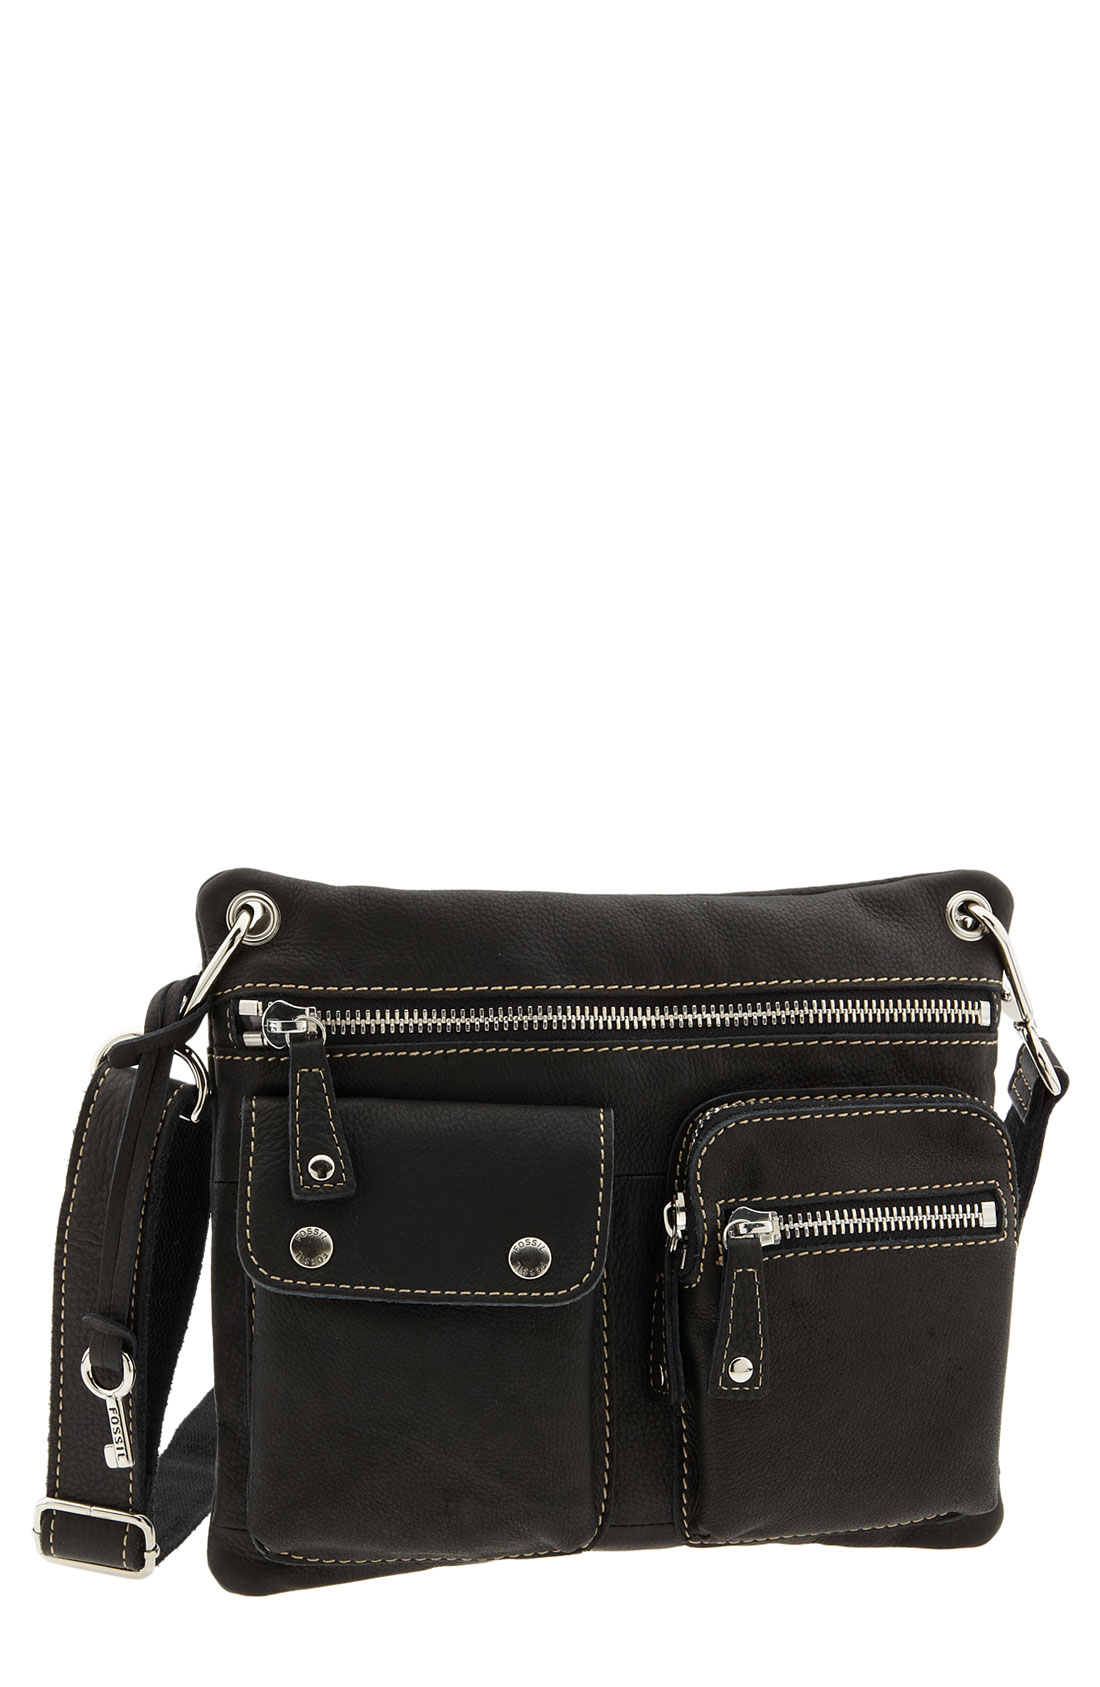 Fossil Front Pocket Leather Crossbody Bag in Black | Lyst